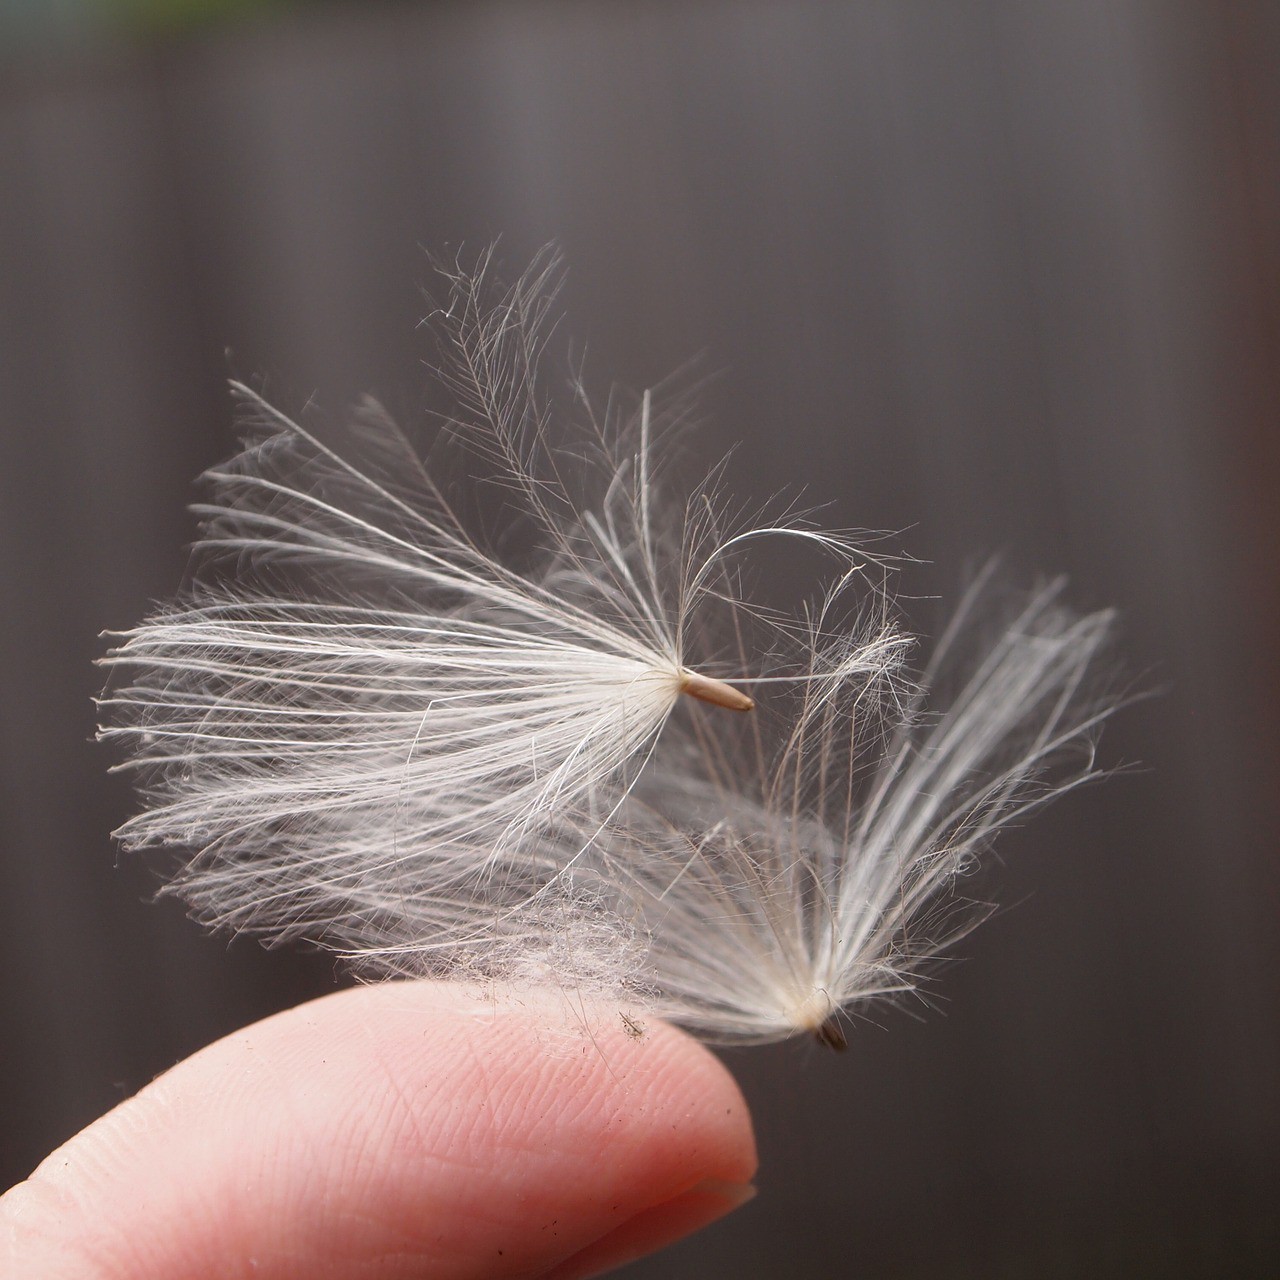 A picture of a feathery-looking plant material. It could be cotton. It's poised lightly on the tip of someone's finger.